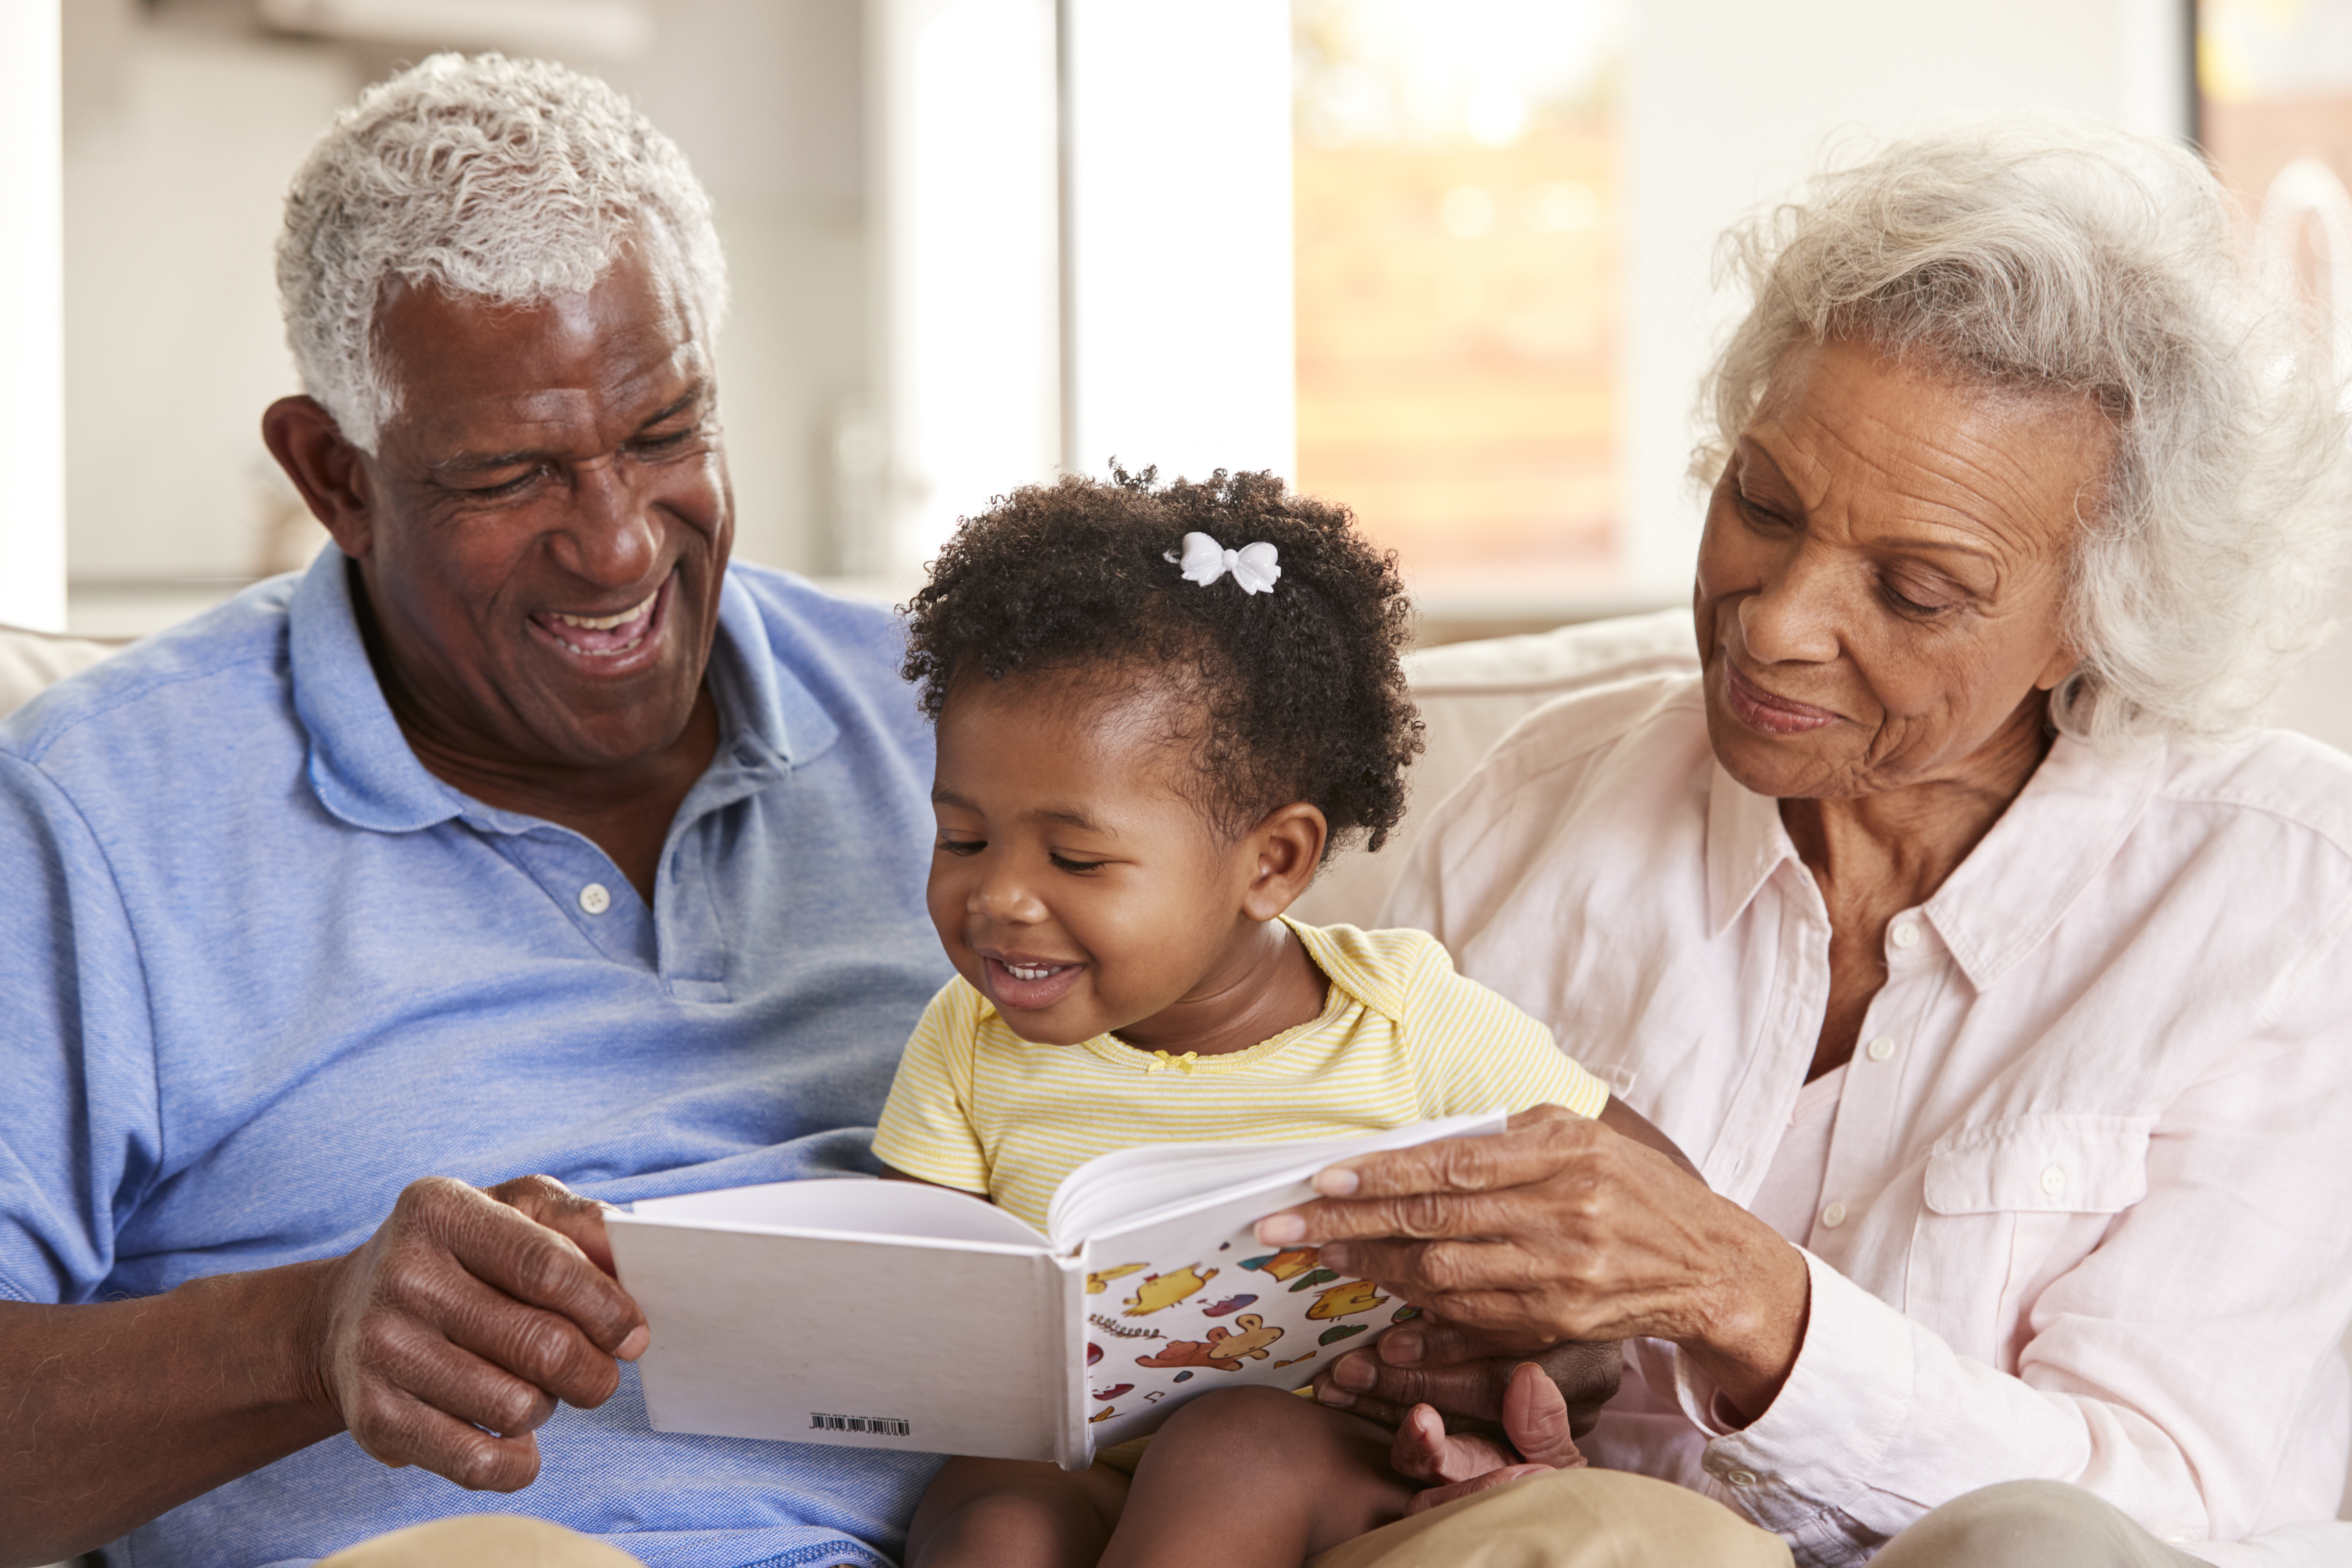 Older adult woman and man reading a children’s book to child on their lap, all smiling